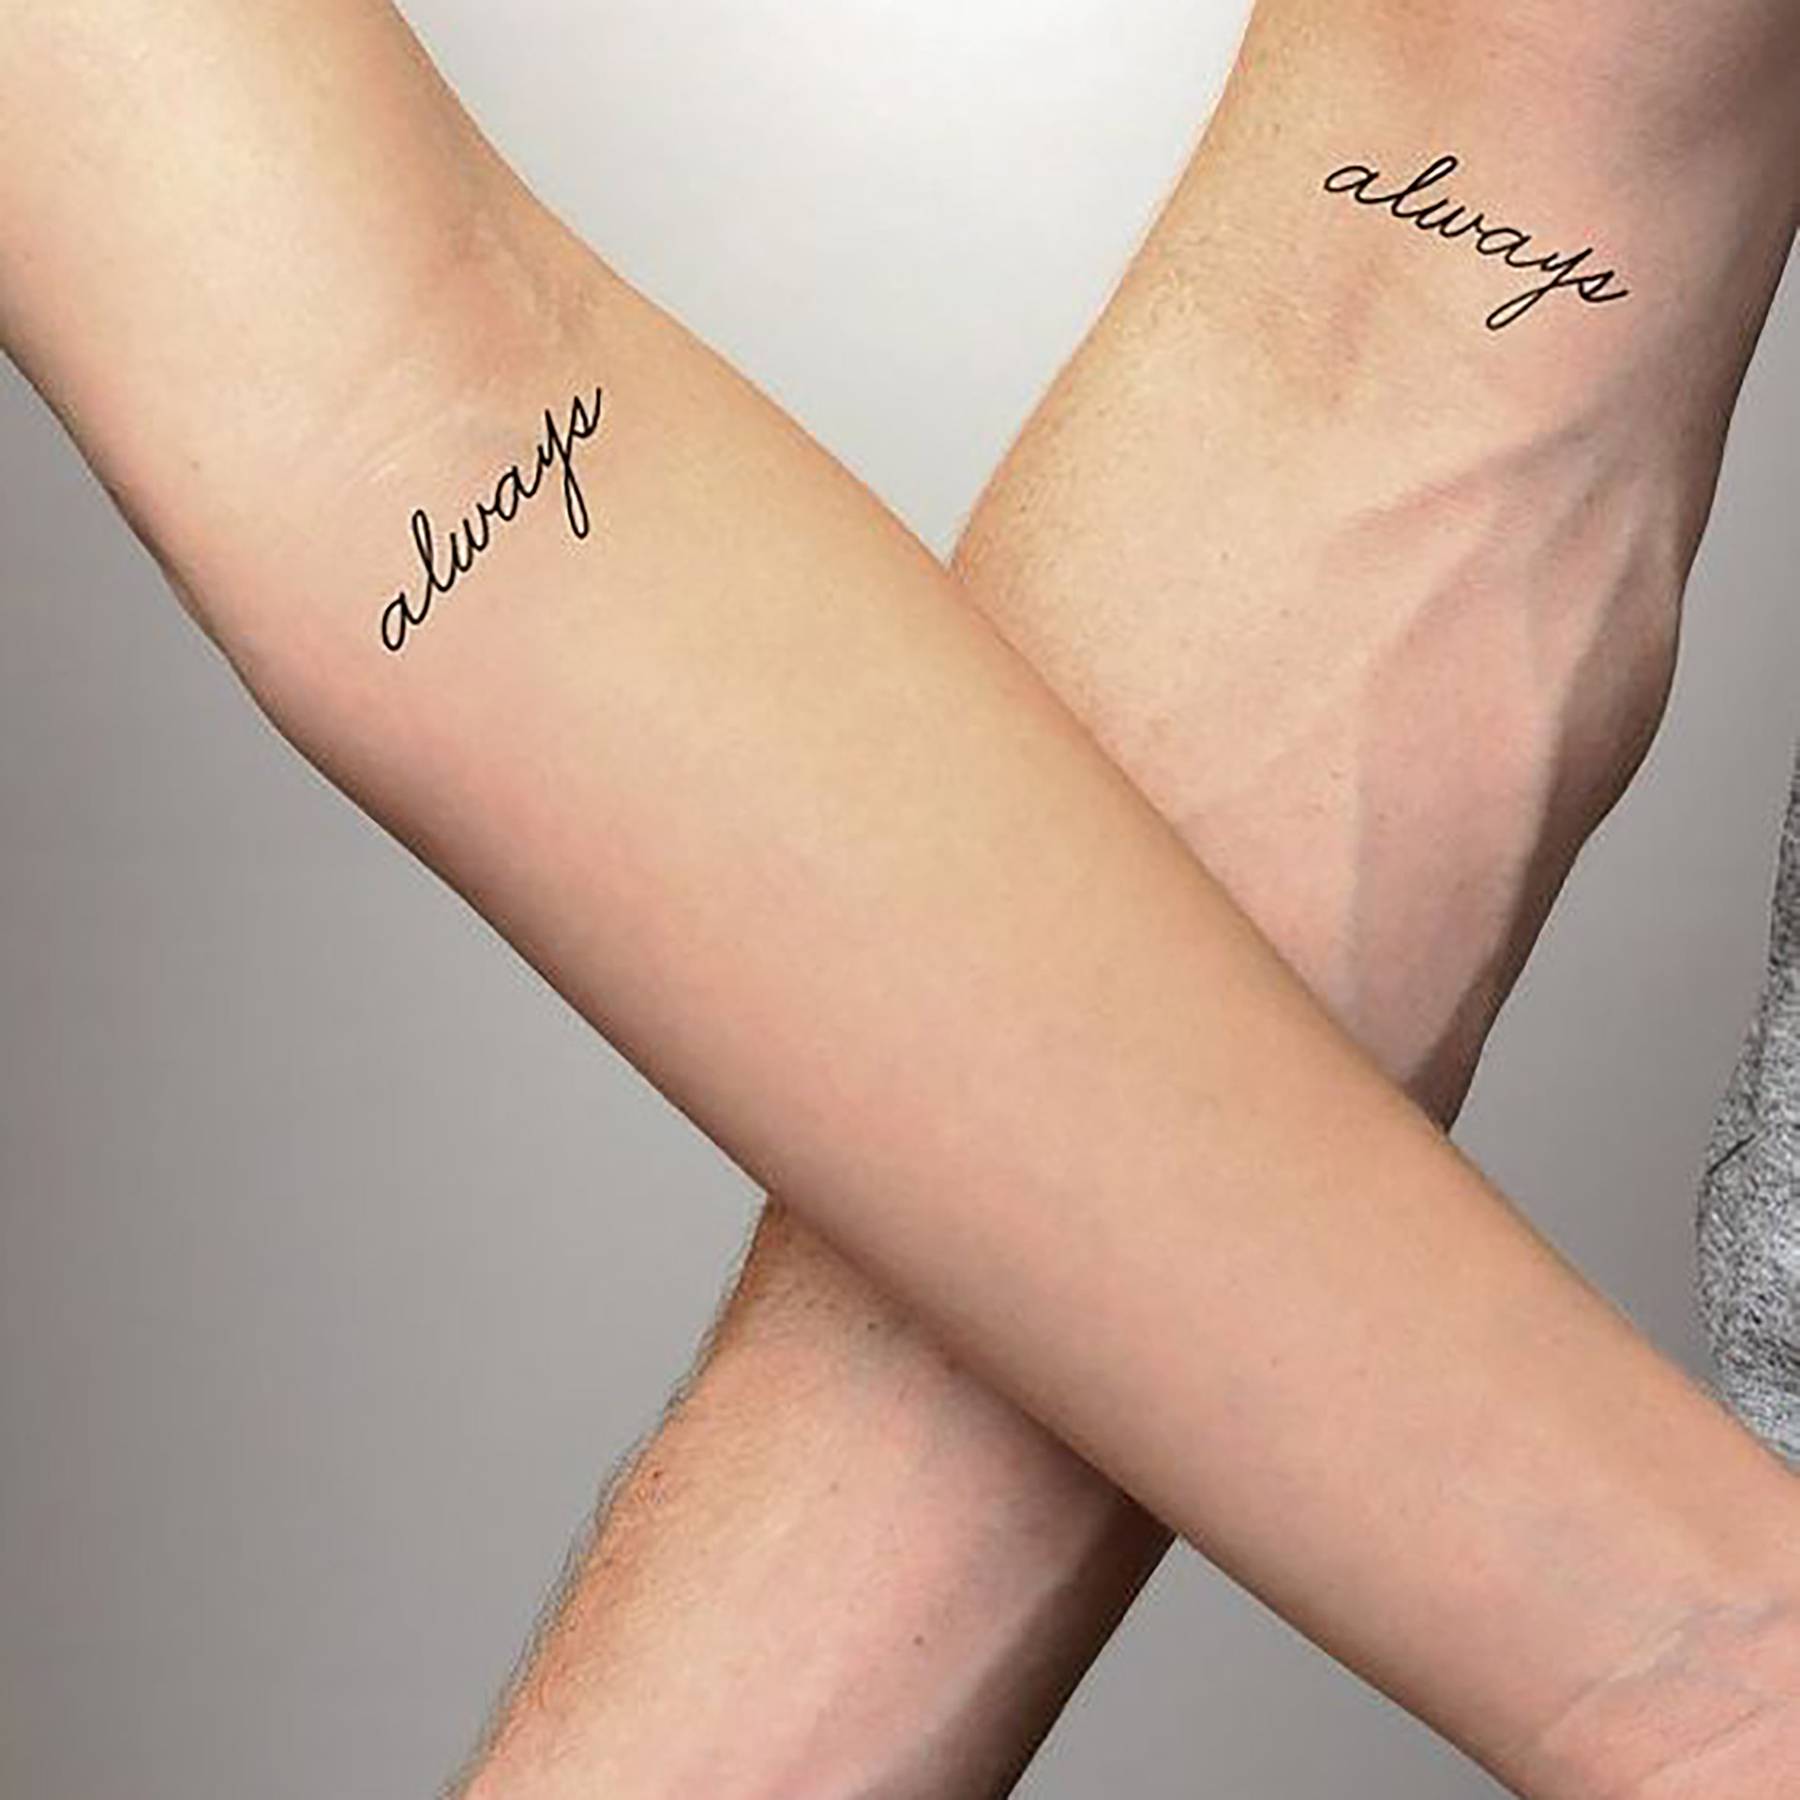  Small Tattoo Ideas for Couples | Matching Tattoos for Couples 